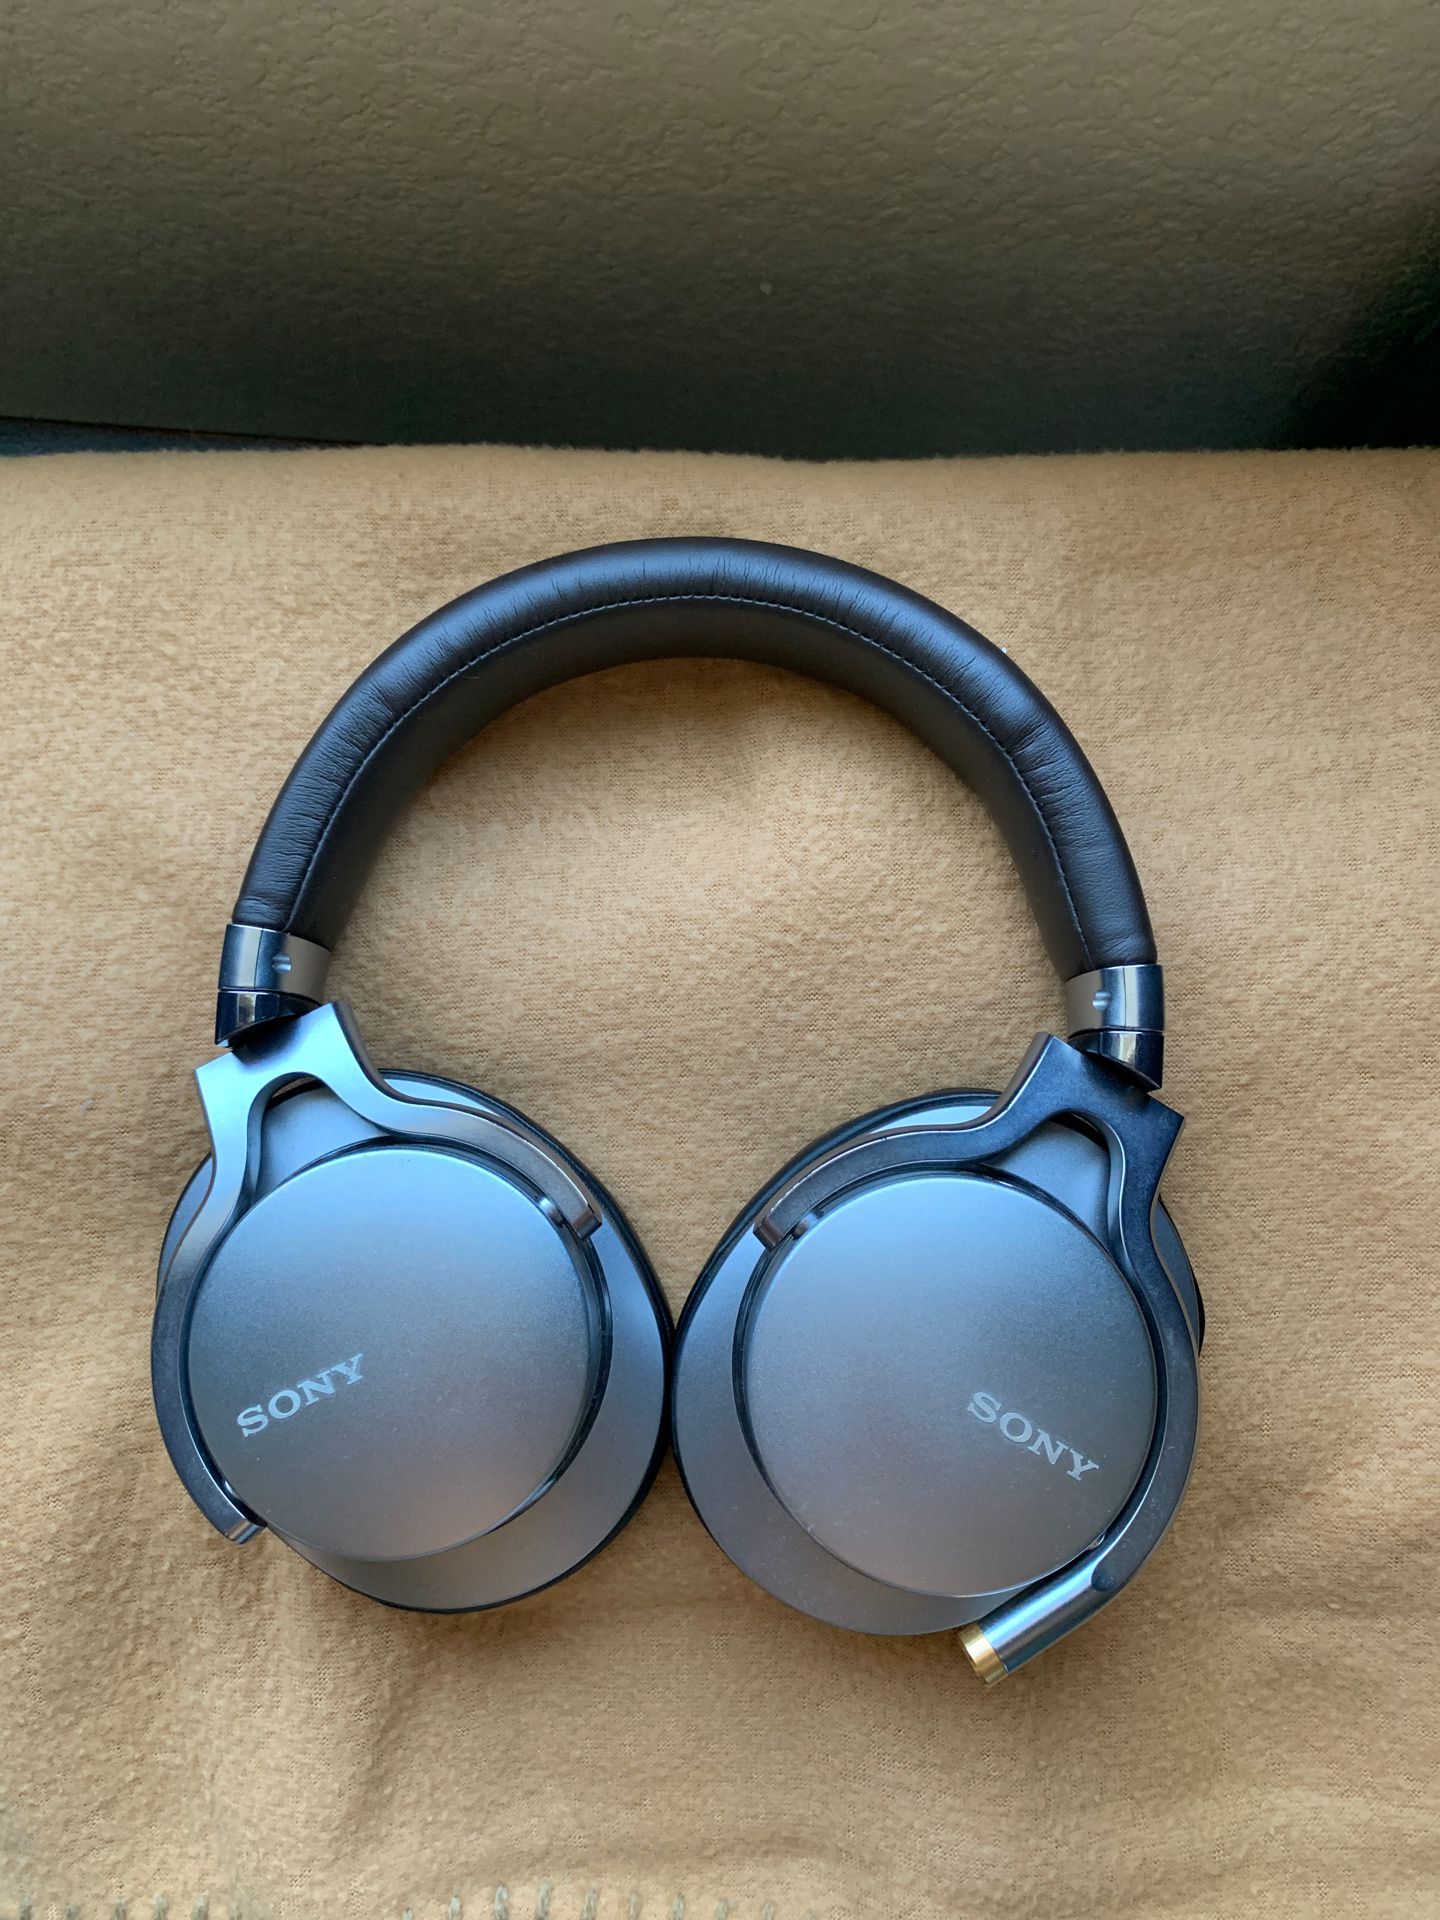 Sony MDR-1A headphones